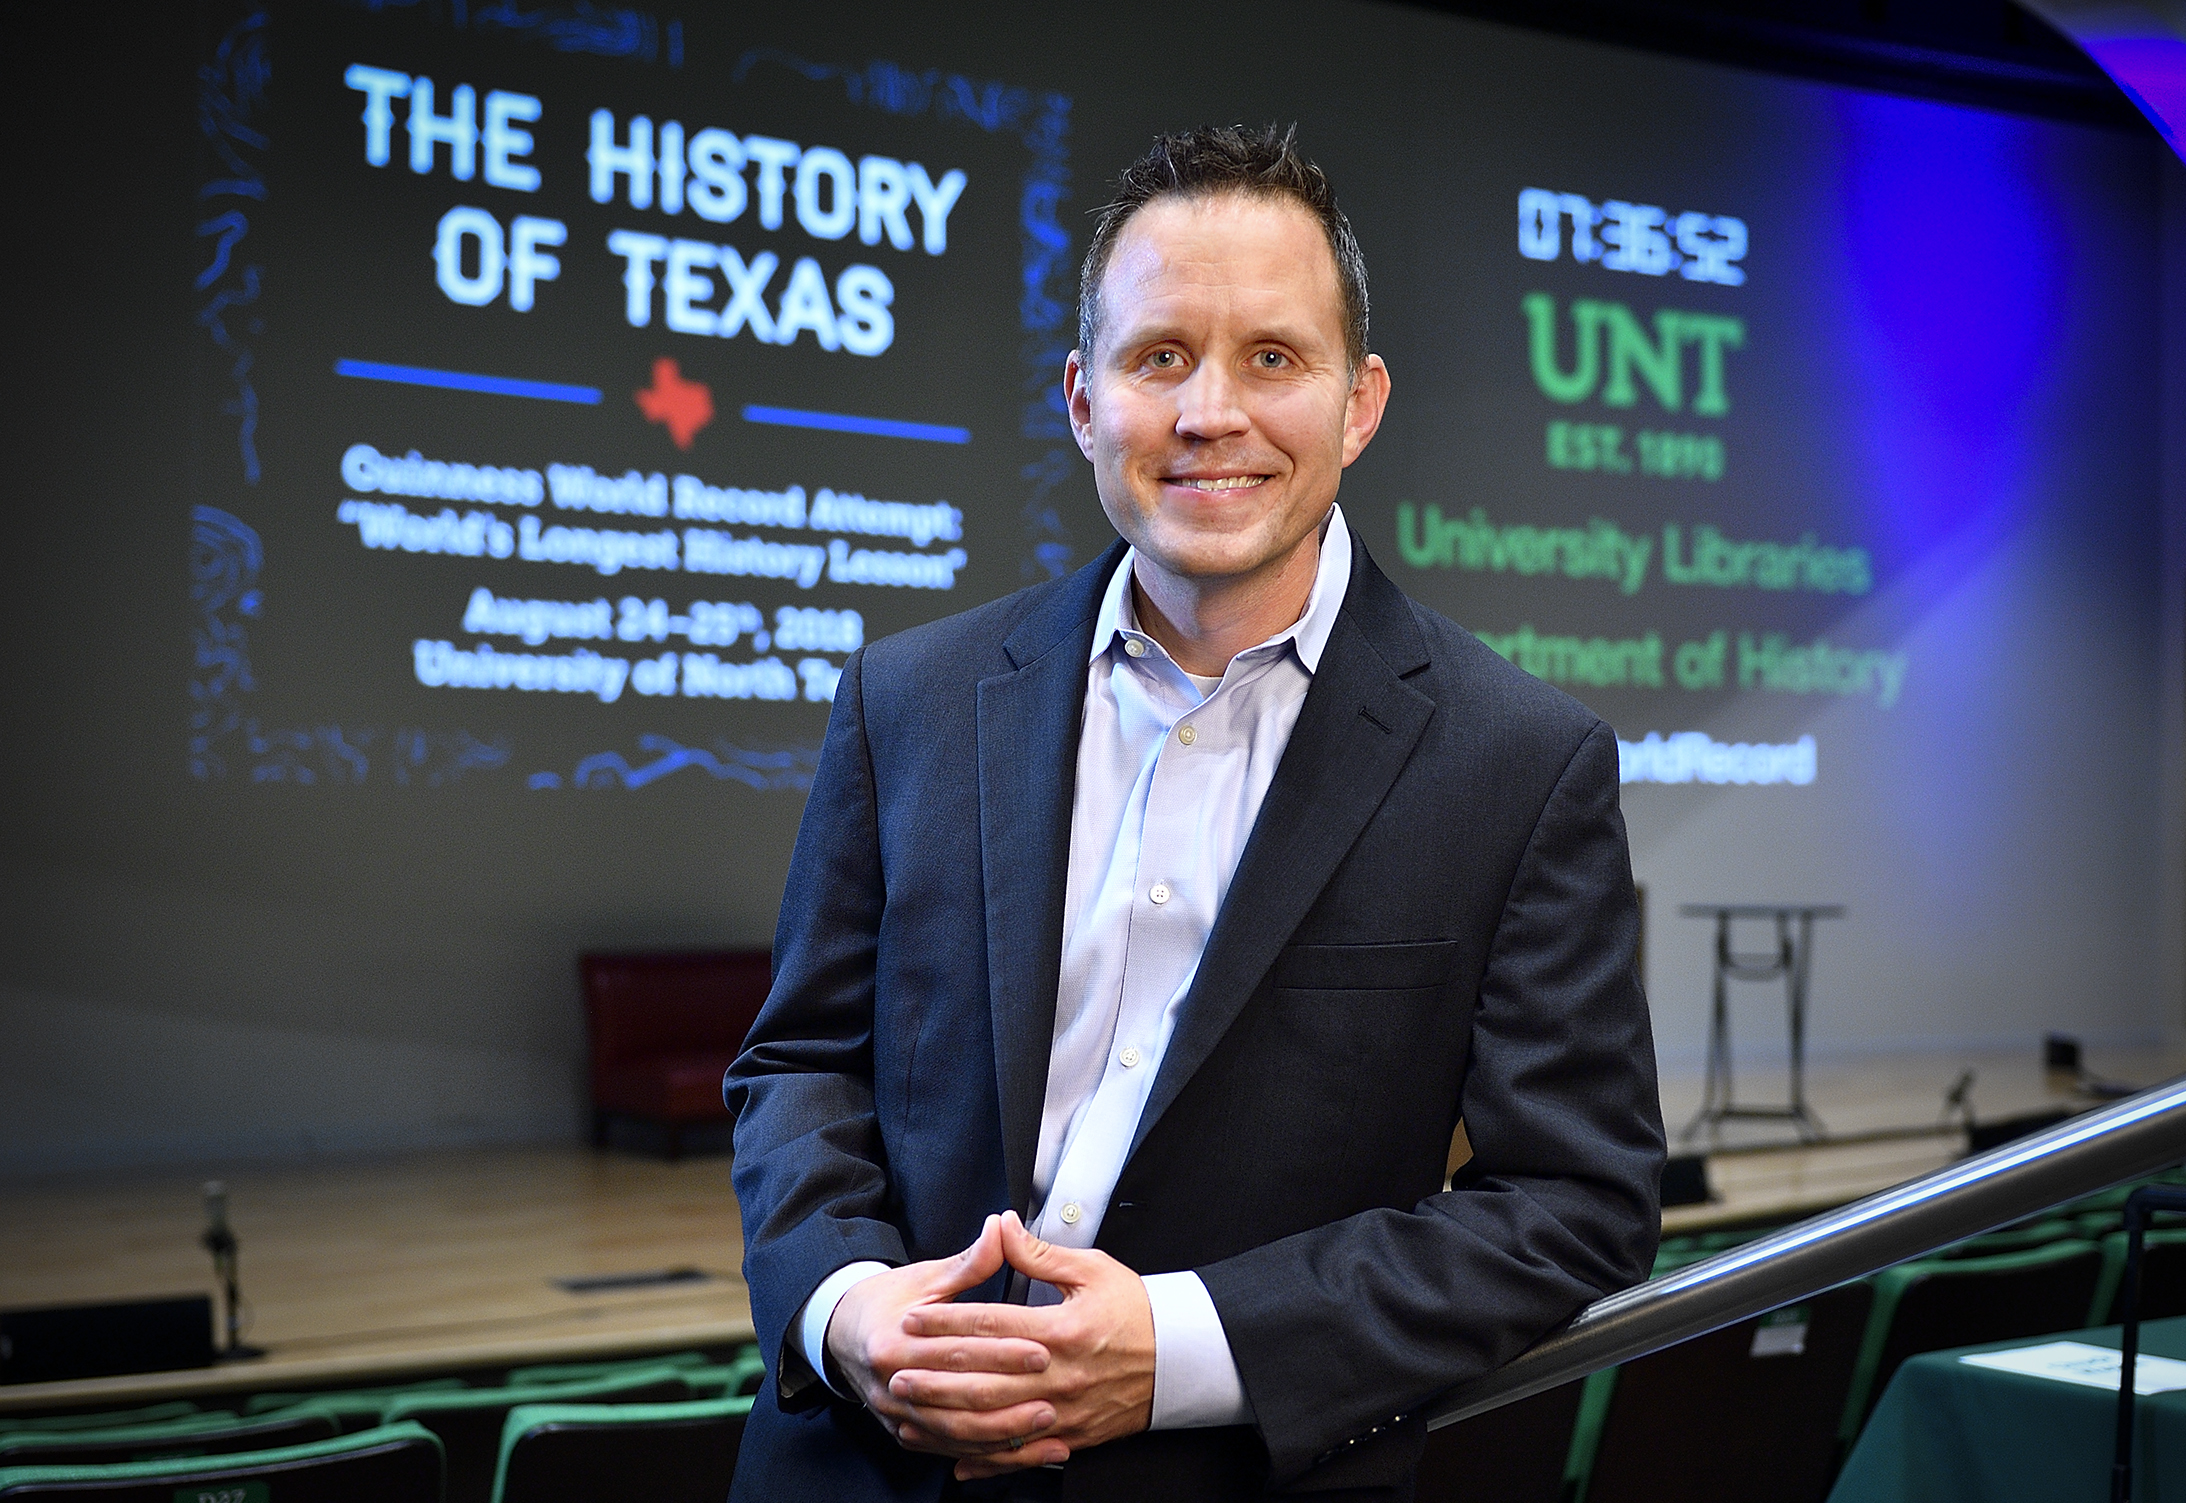 OLLI at UNT announces guided history tour ‘to walk in the footsteps of the Texas Revolution’